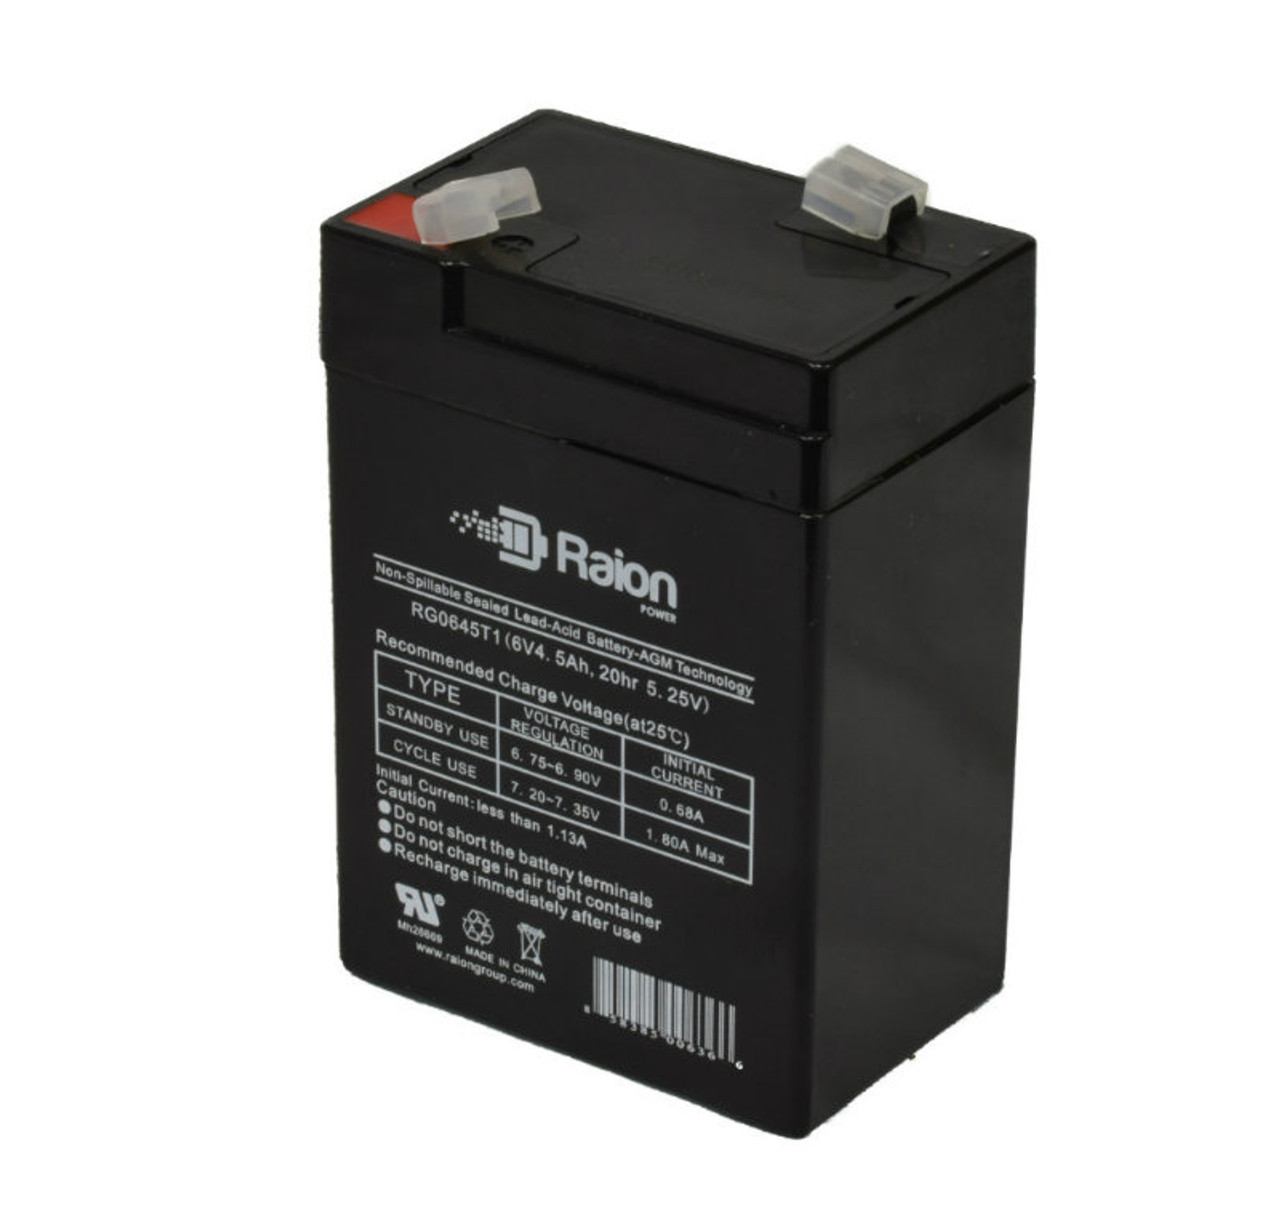 Raion Power RG0645T1 6V 4.5Ah Replacement Battery Cartridge for AJC C5S